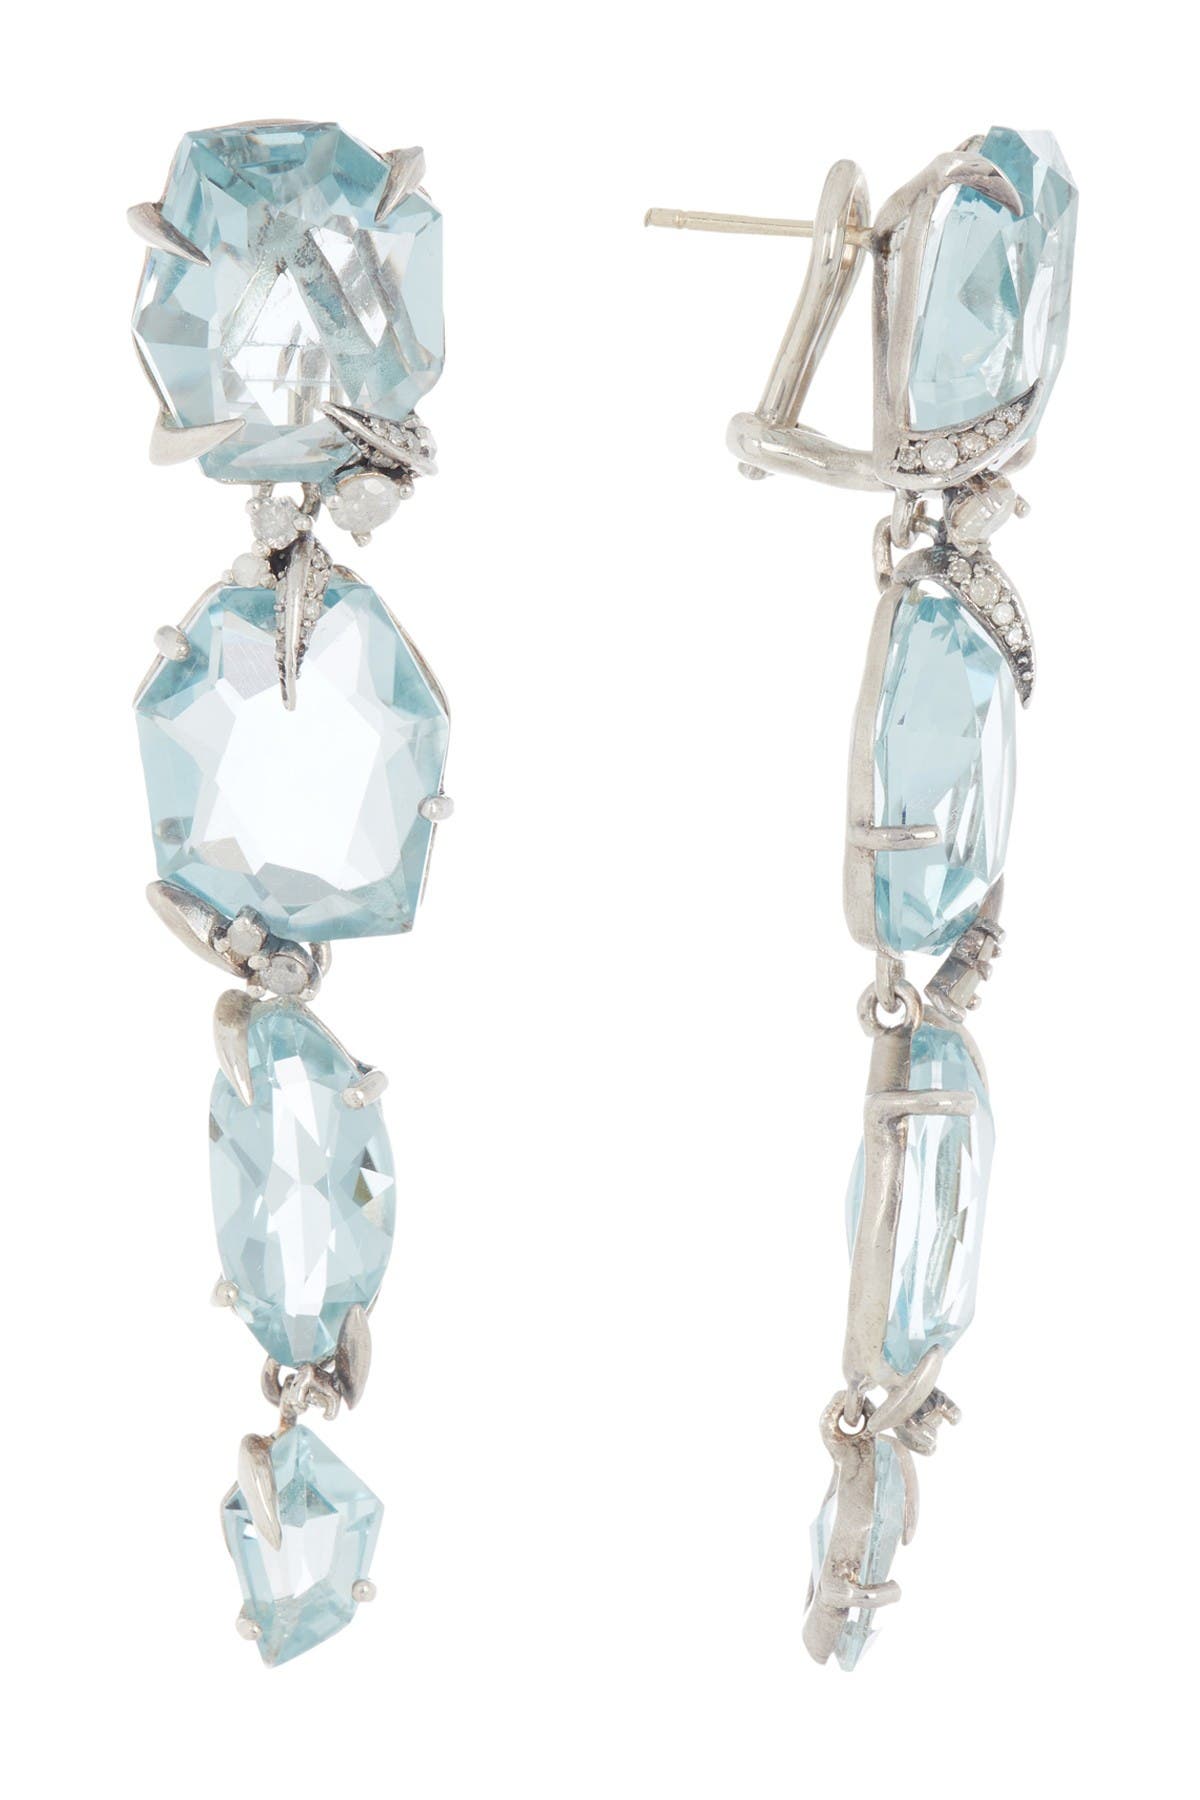 Alexis Bittar Sterling Silver Quartz With Pave Diamond Drop Earrings In Light Oxidized Sterling Silver At Nordstro